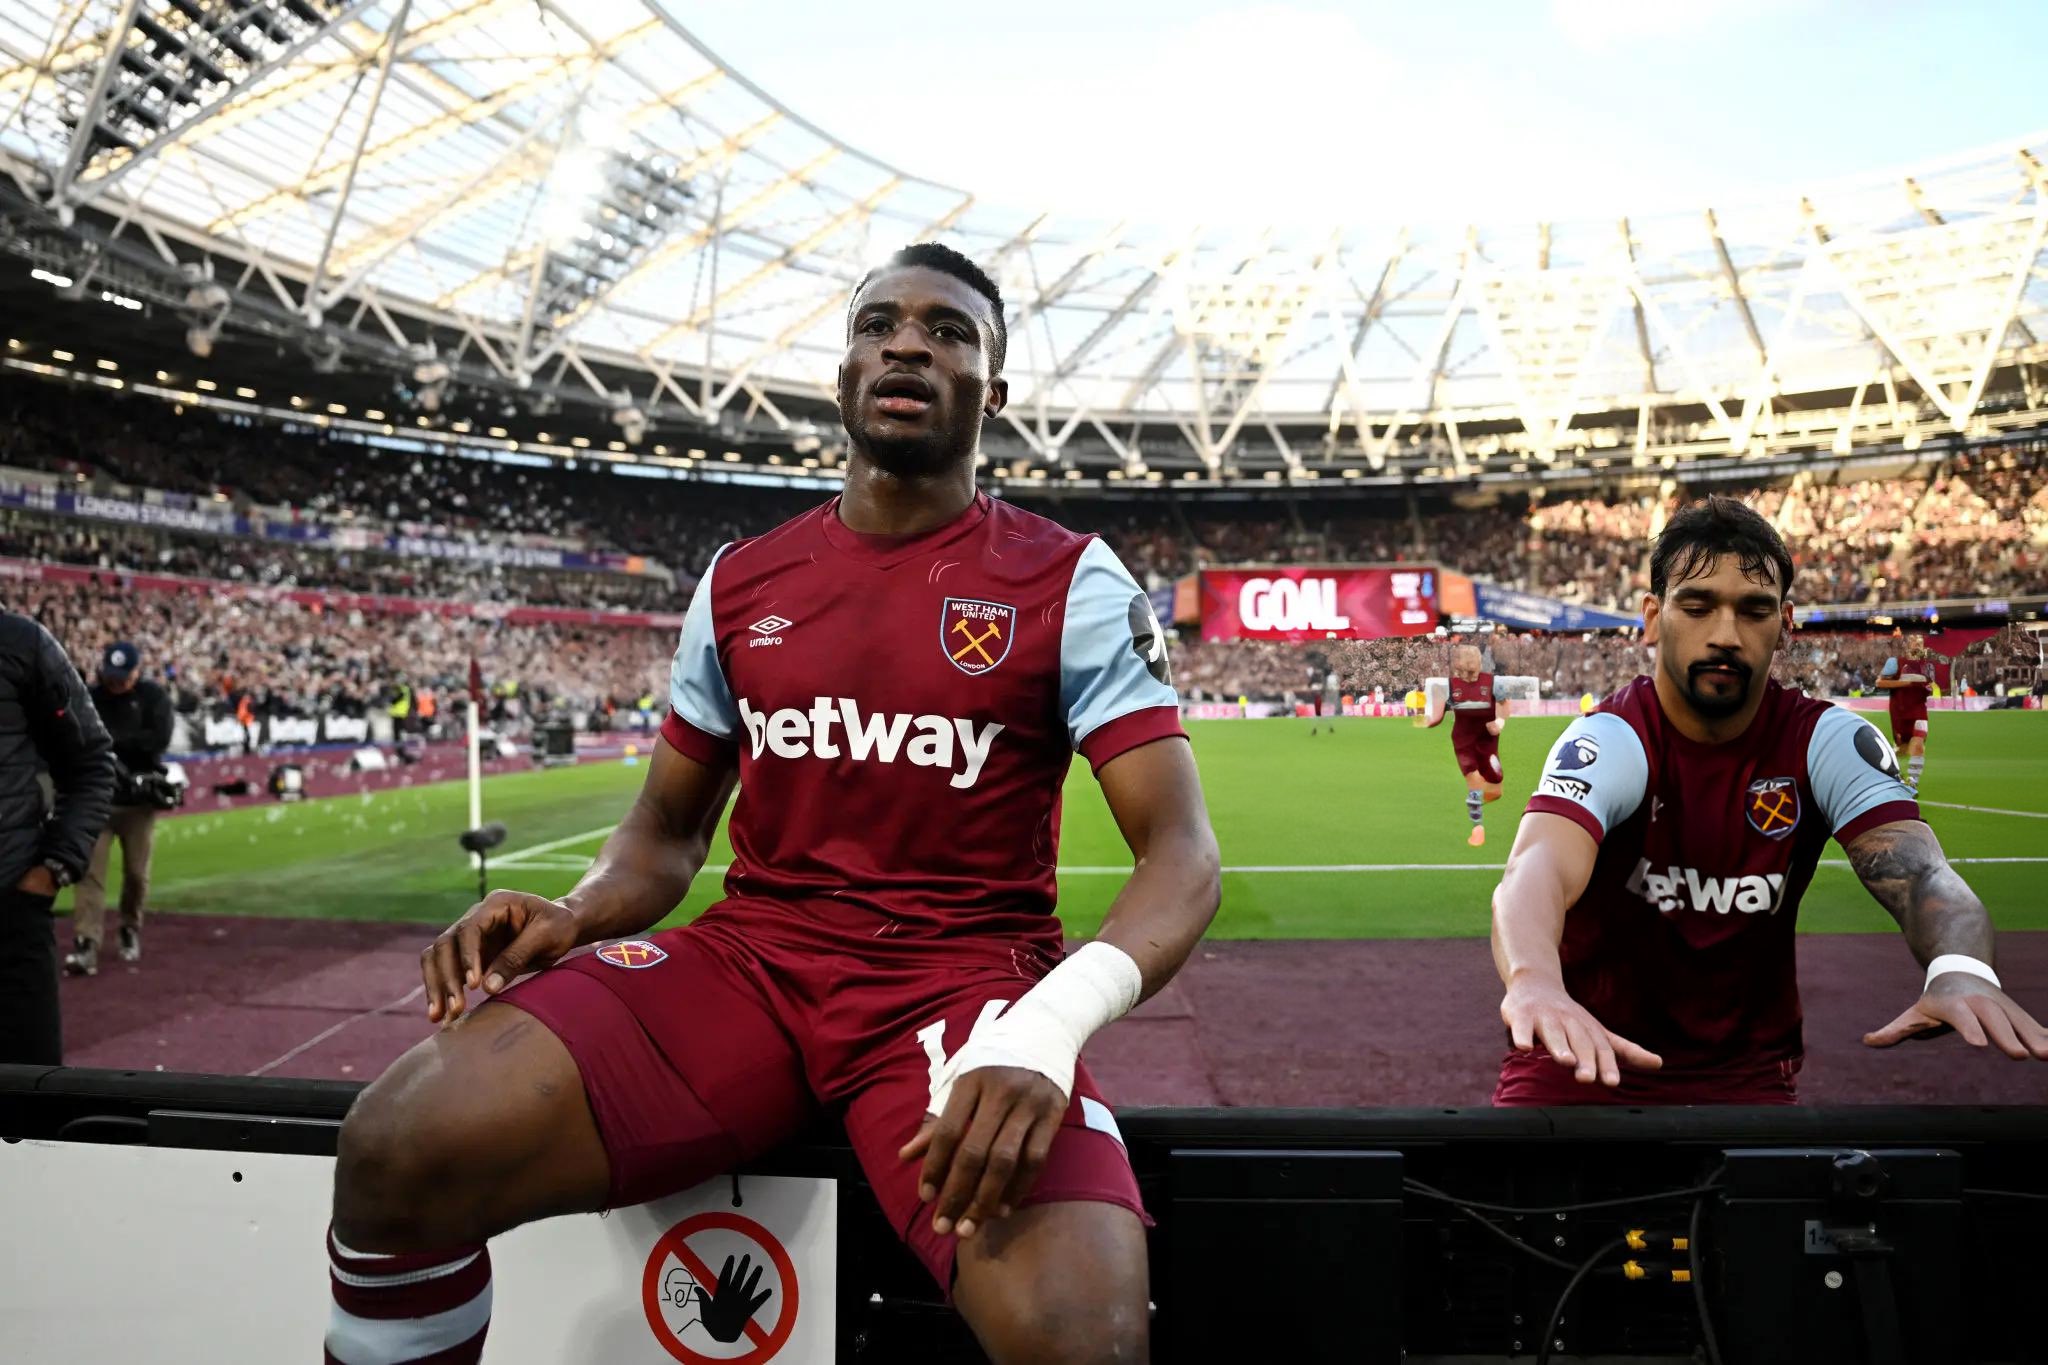 VIDEO: Watch Mohammed Kudus’ two goals in West Ham’s big win against Wolves